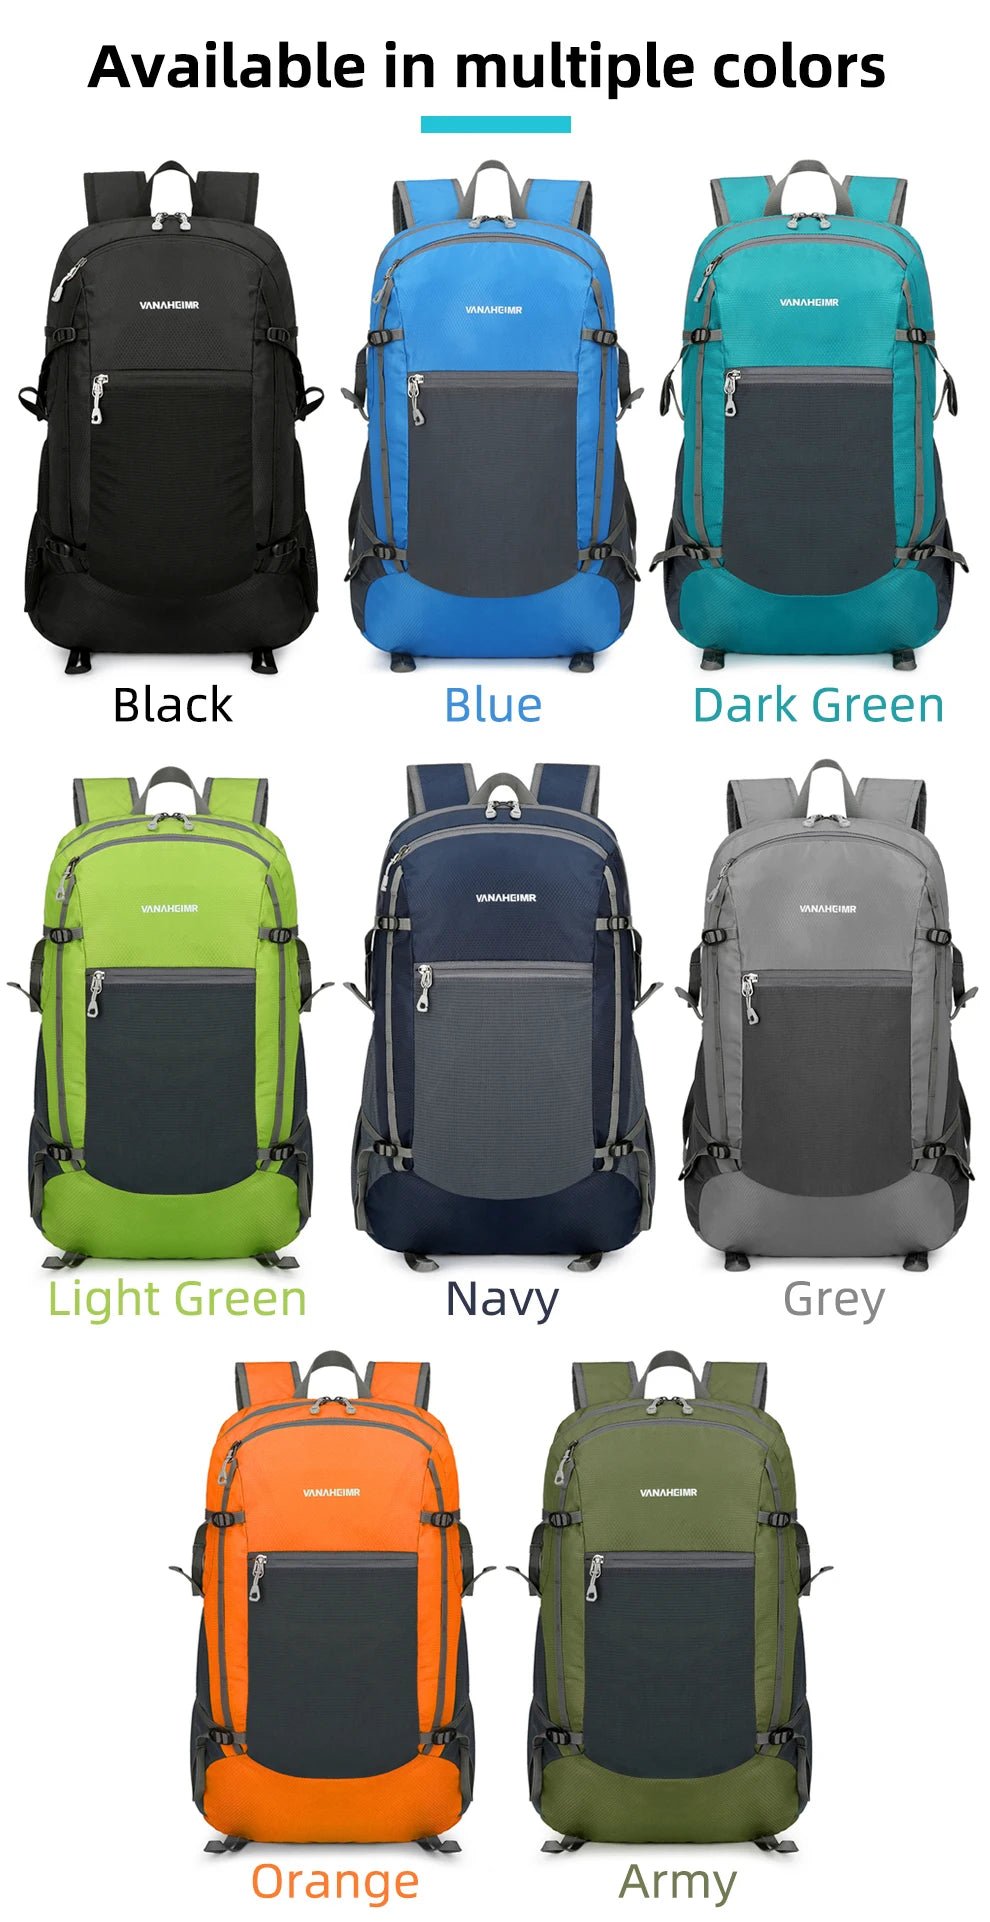 18L Lightweight Foldable Packable Day Pack - ULT Gear